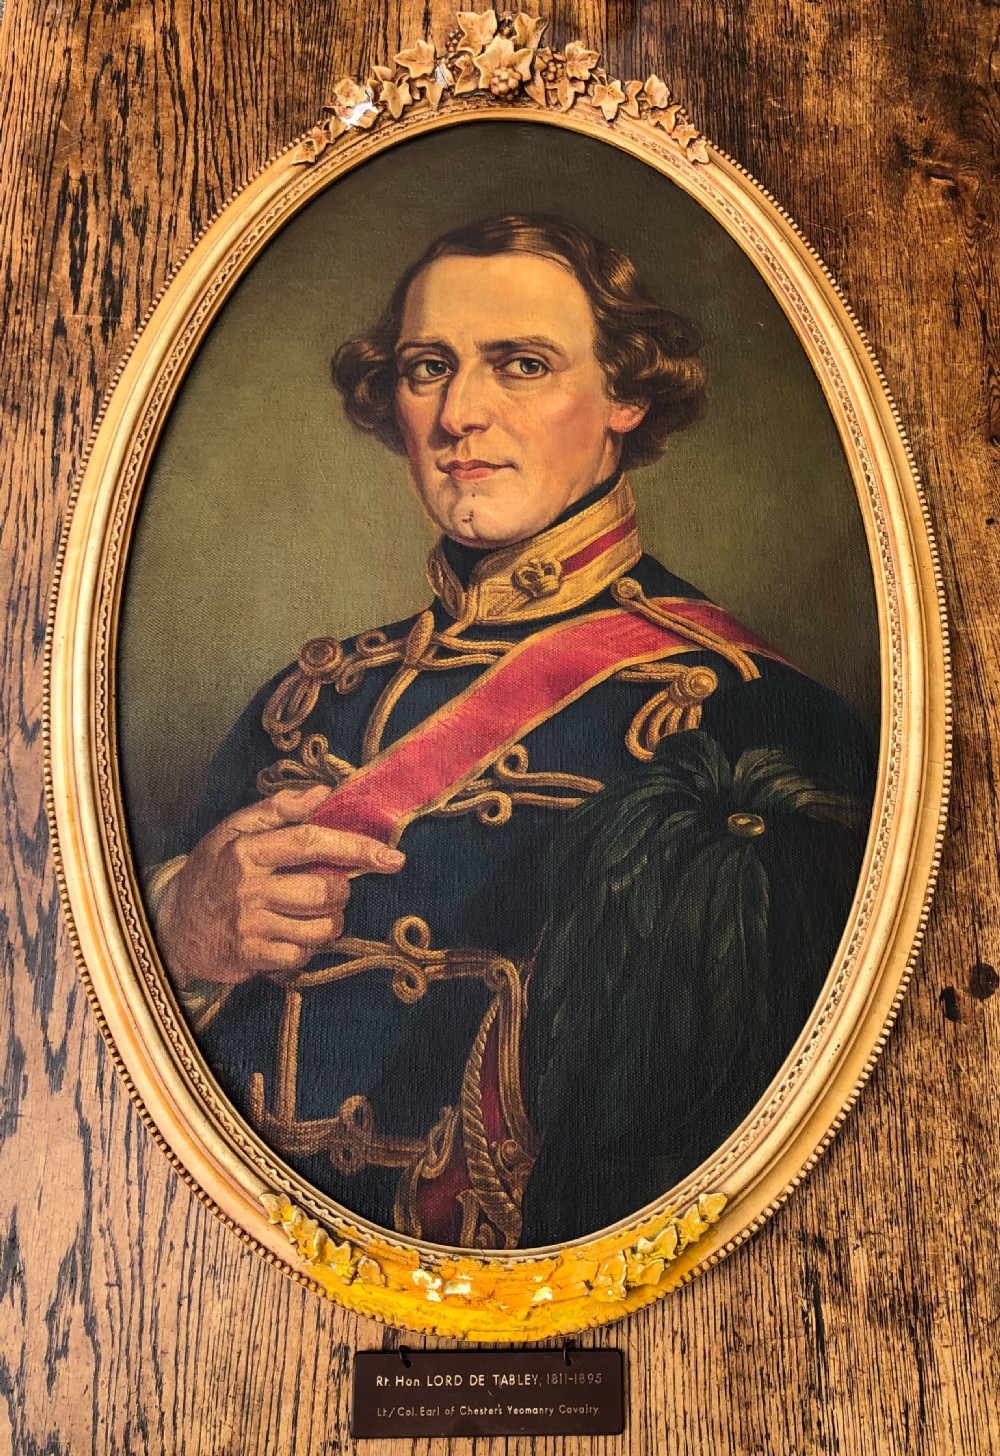 c19th oil painting of lord de tablety 18111895